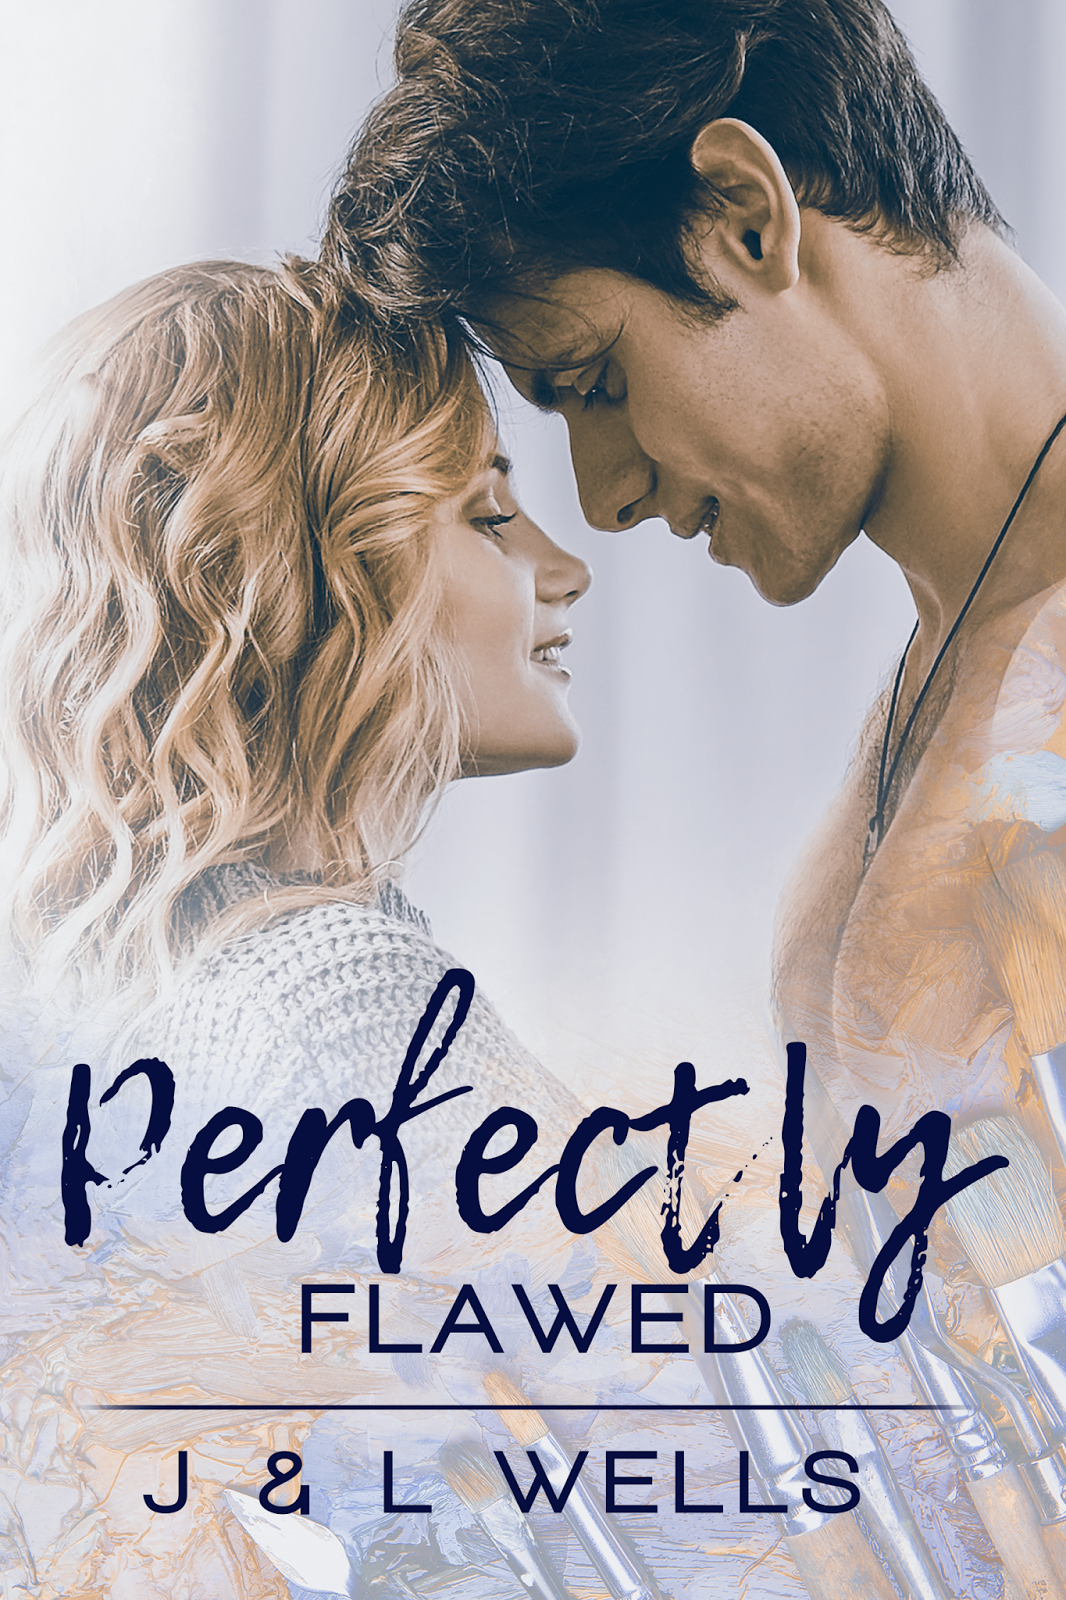 L can well. Perfect Imperfect book. Perfectly flawed_73. J J wells.